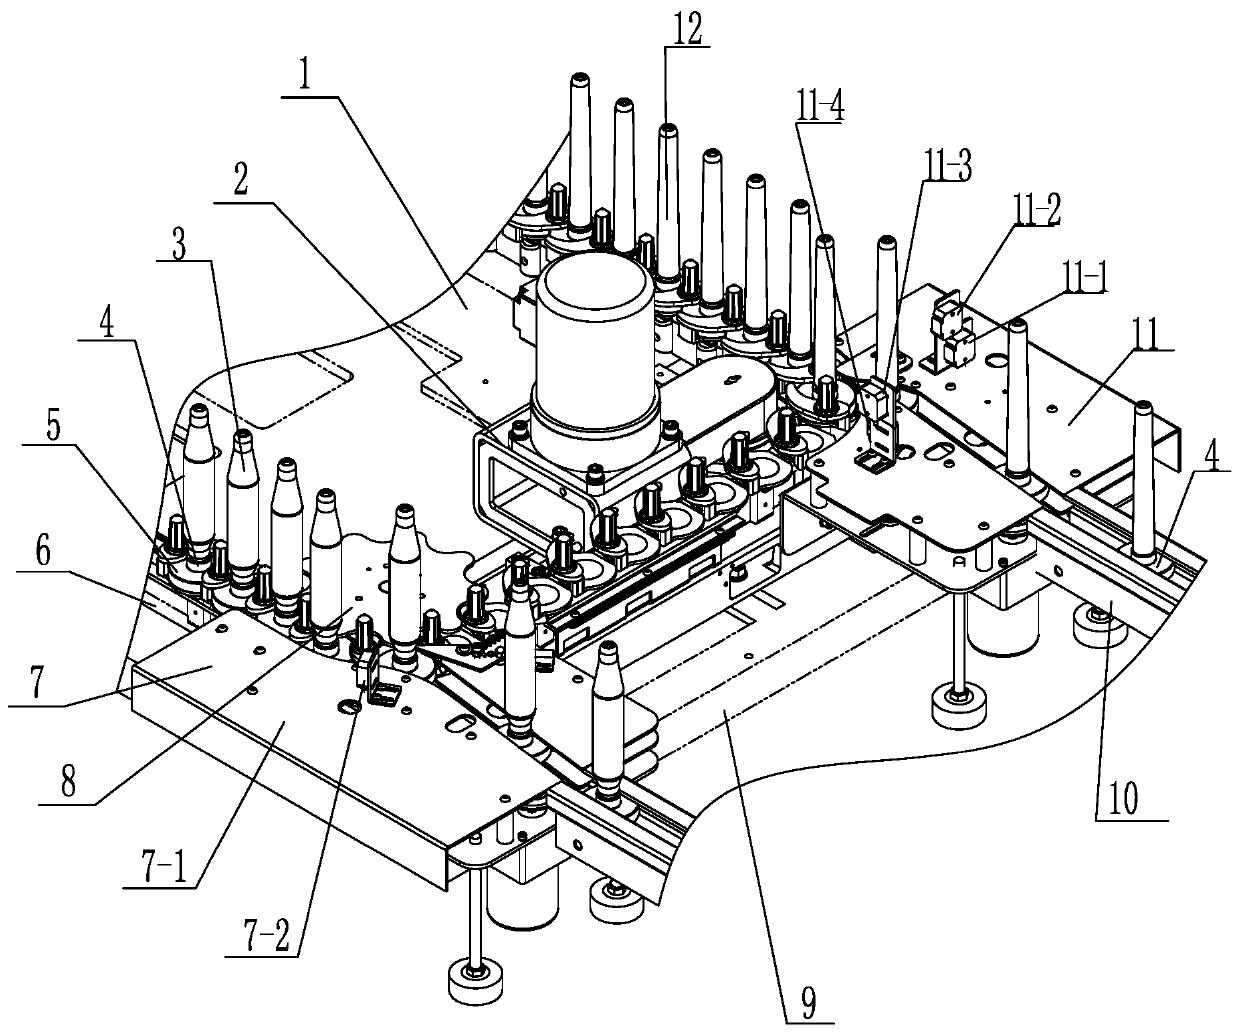 Conveying interface device and conveying method for fine-linked bobbins and bobbins